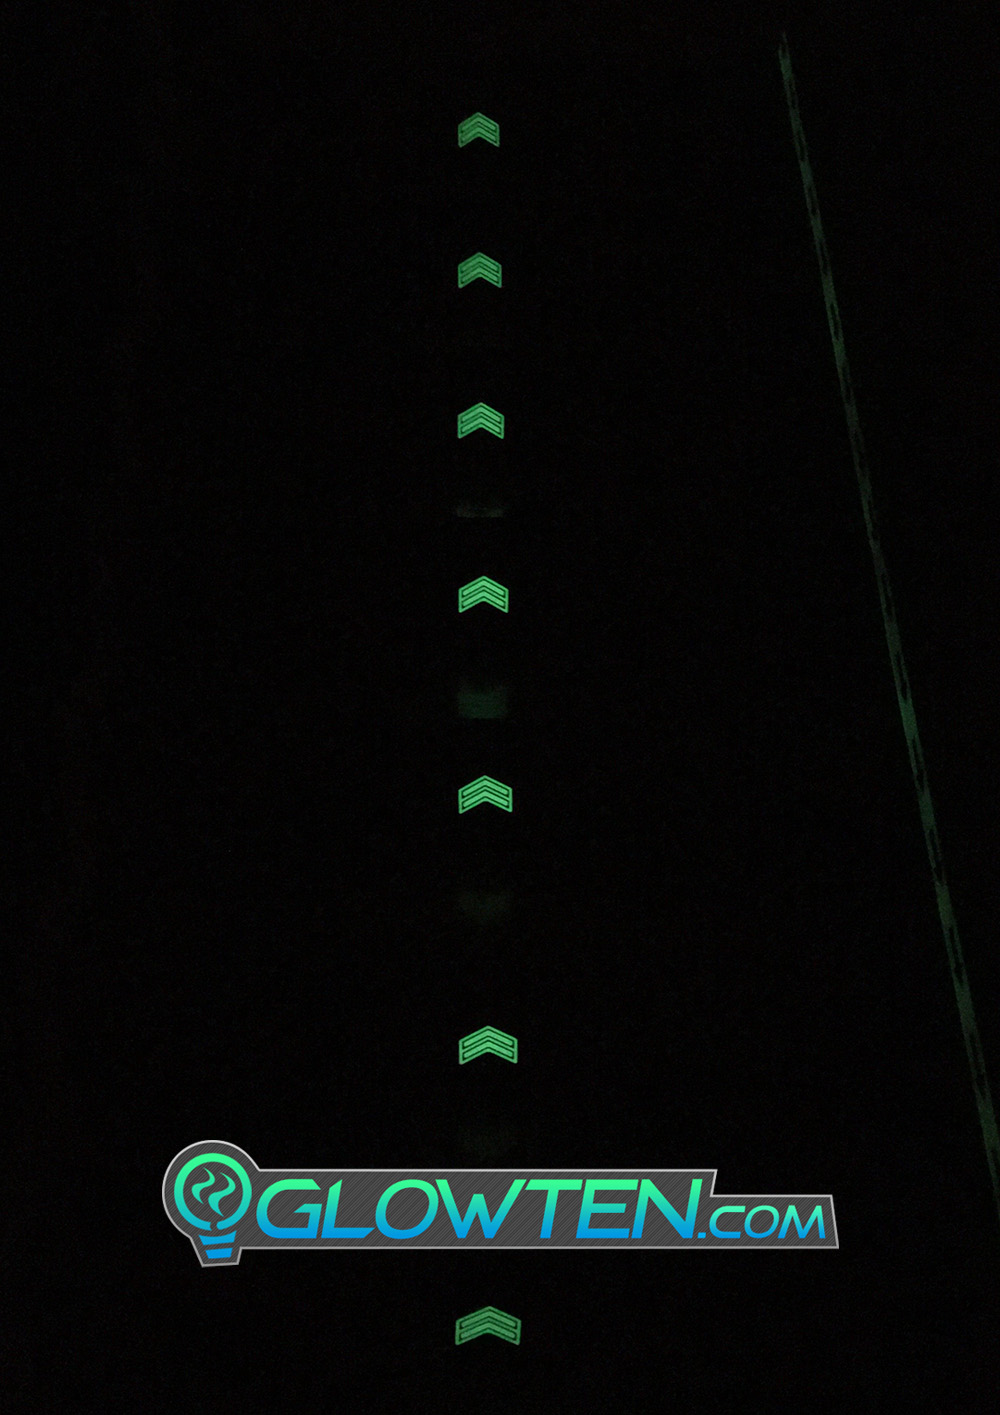 GLOWTEN.com - DOUBLE ARROWS Glow in the Dark Stairs Guide Directional Safety See Clearly At Night Metal Badge Sign glow green in the dark arrow marking picture photo cap preview pic 6